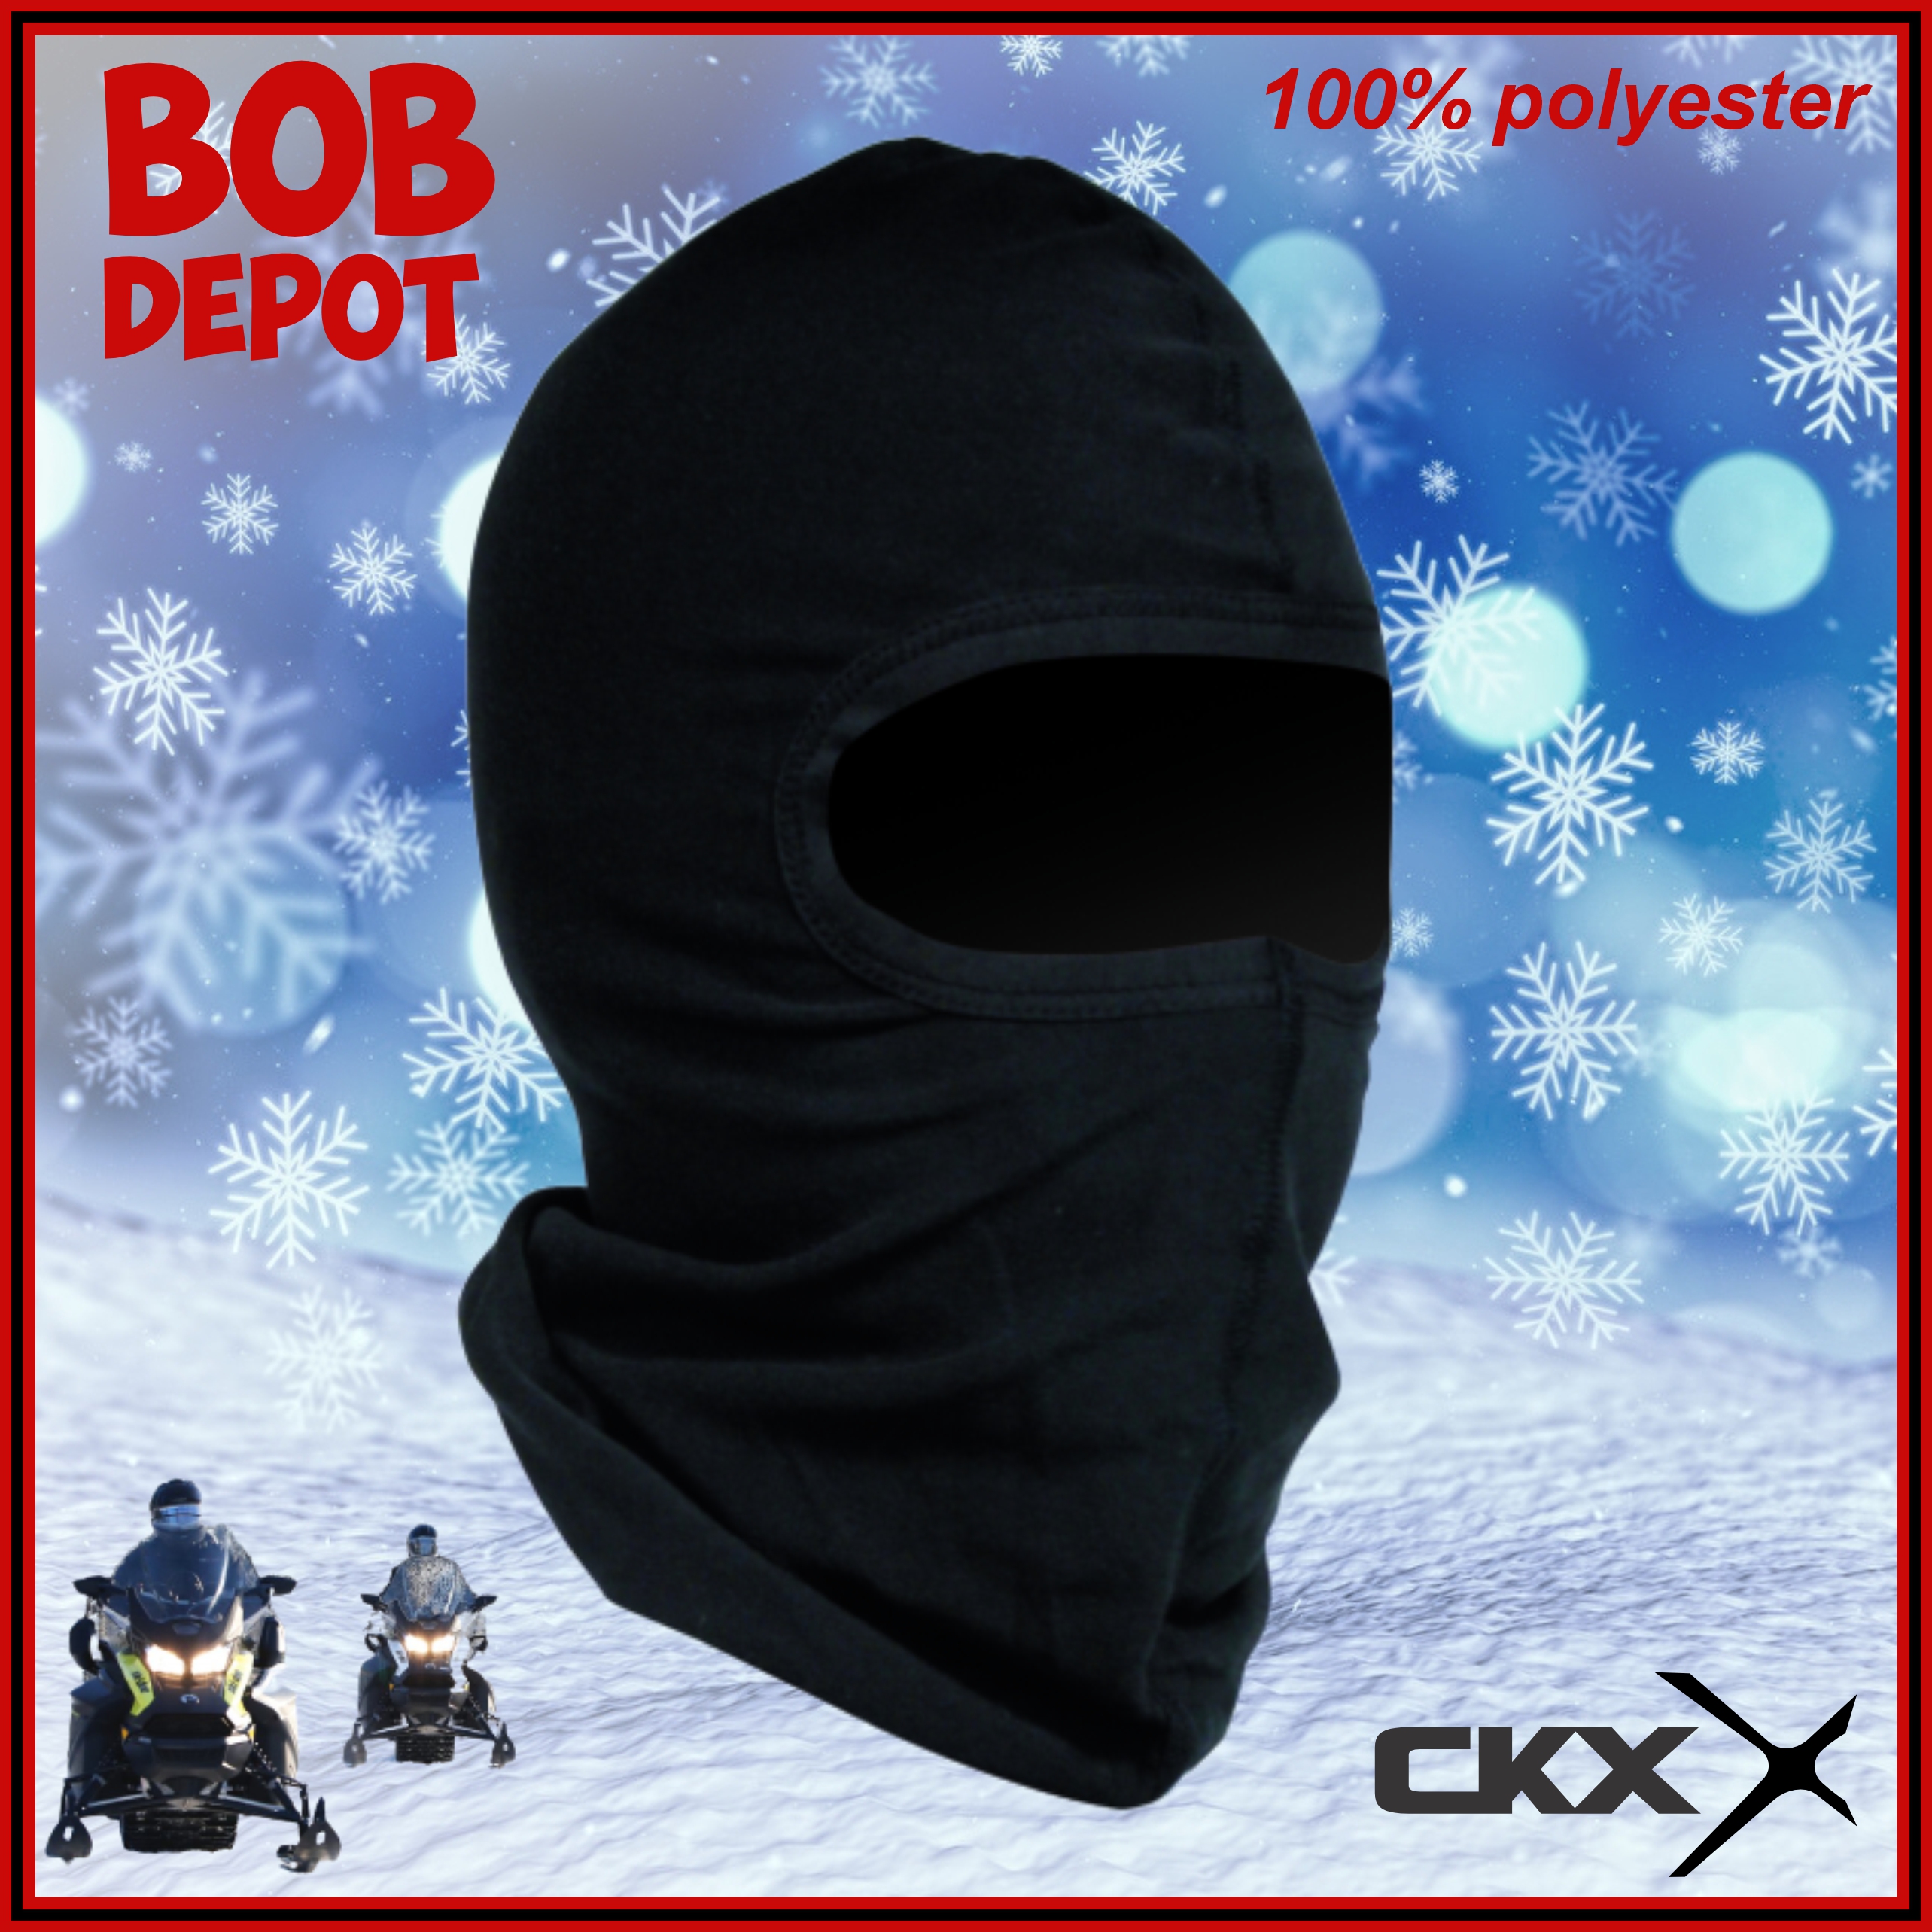 Cagoule/Passe-Montagne/Balaclava 100% Polyester - One Size